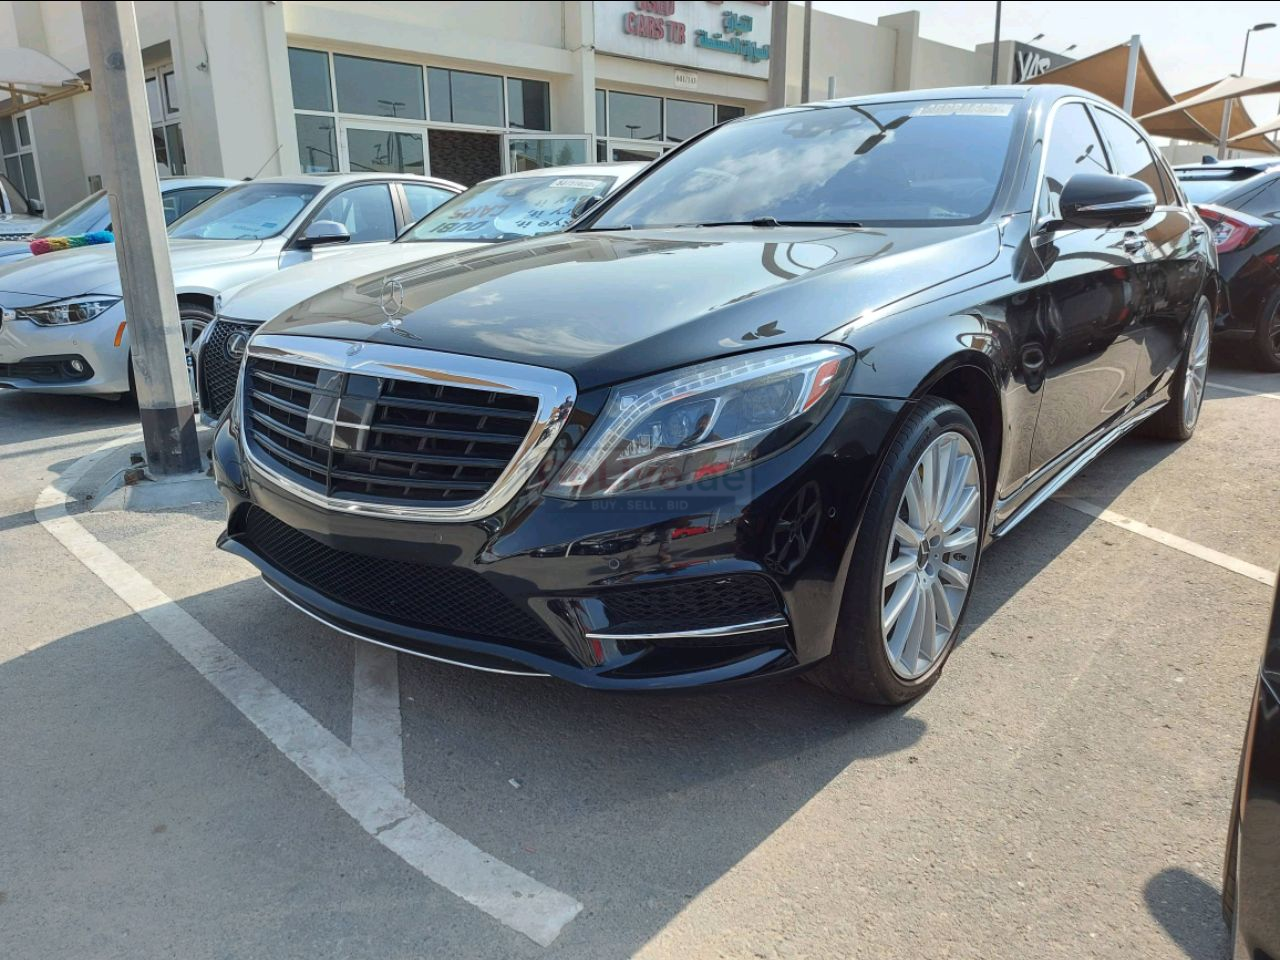 Mercedes Benz S-Class 2015 AED 155,000, Good condition, Full Option, US Spec